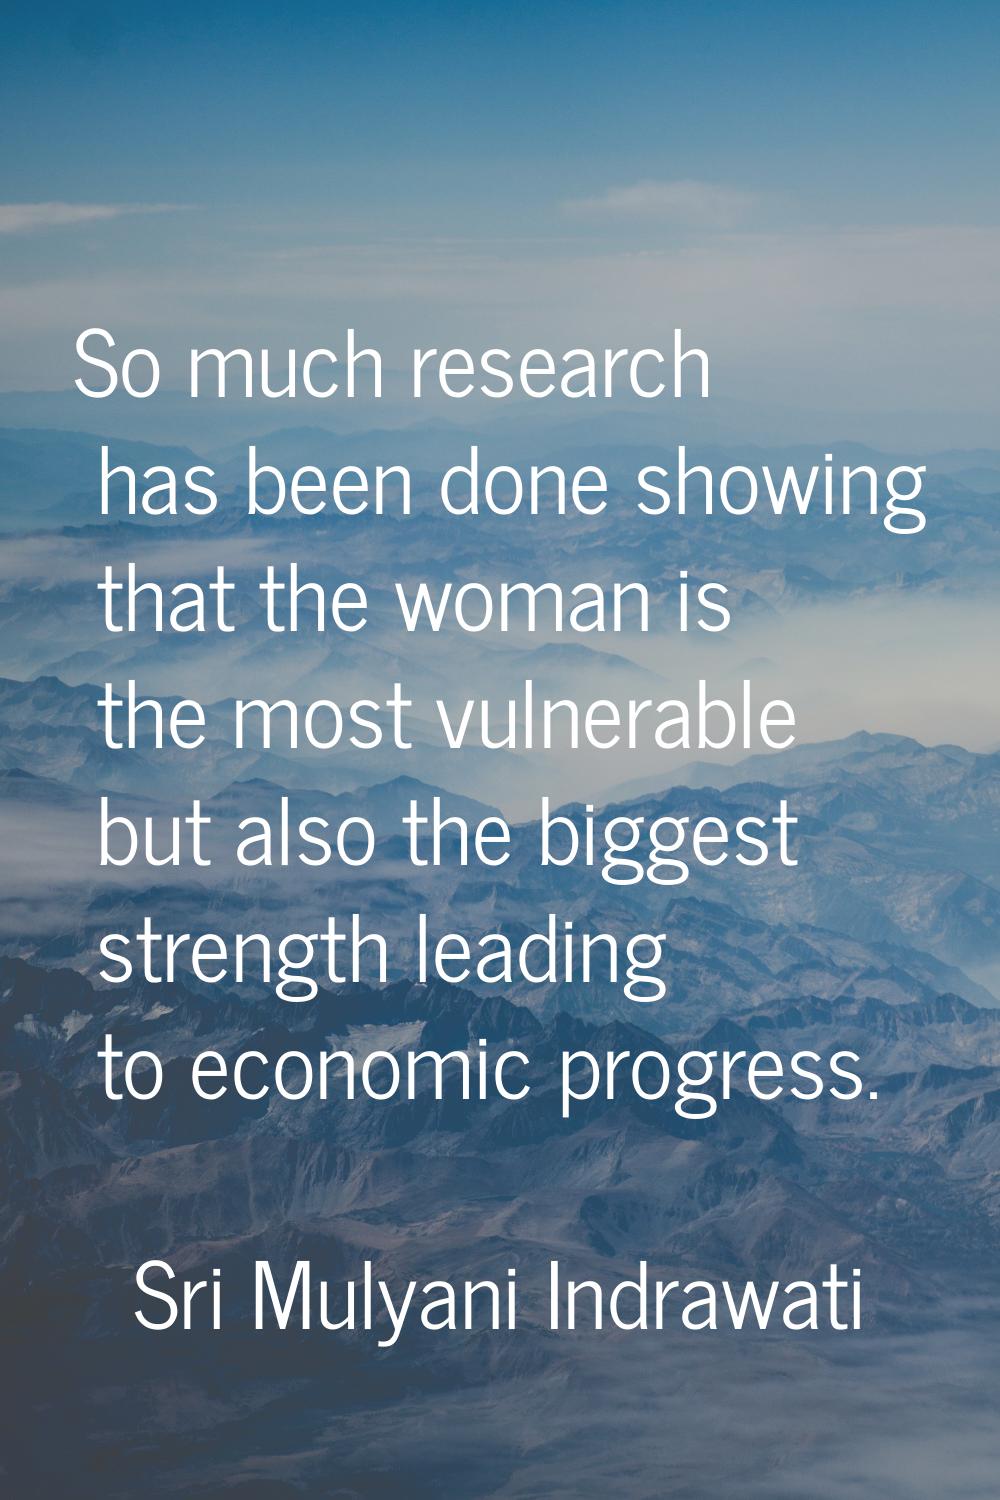 So much research has been done showing that the woman is the most vulnerable but also the biggest s